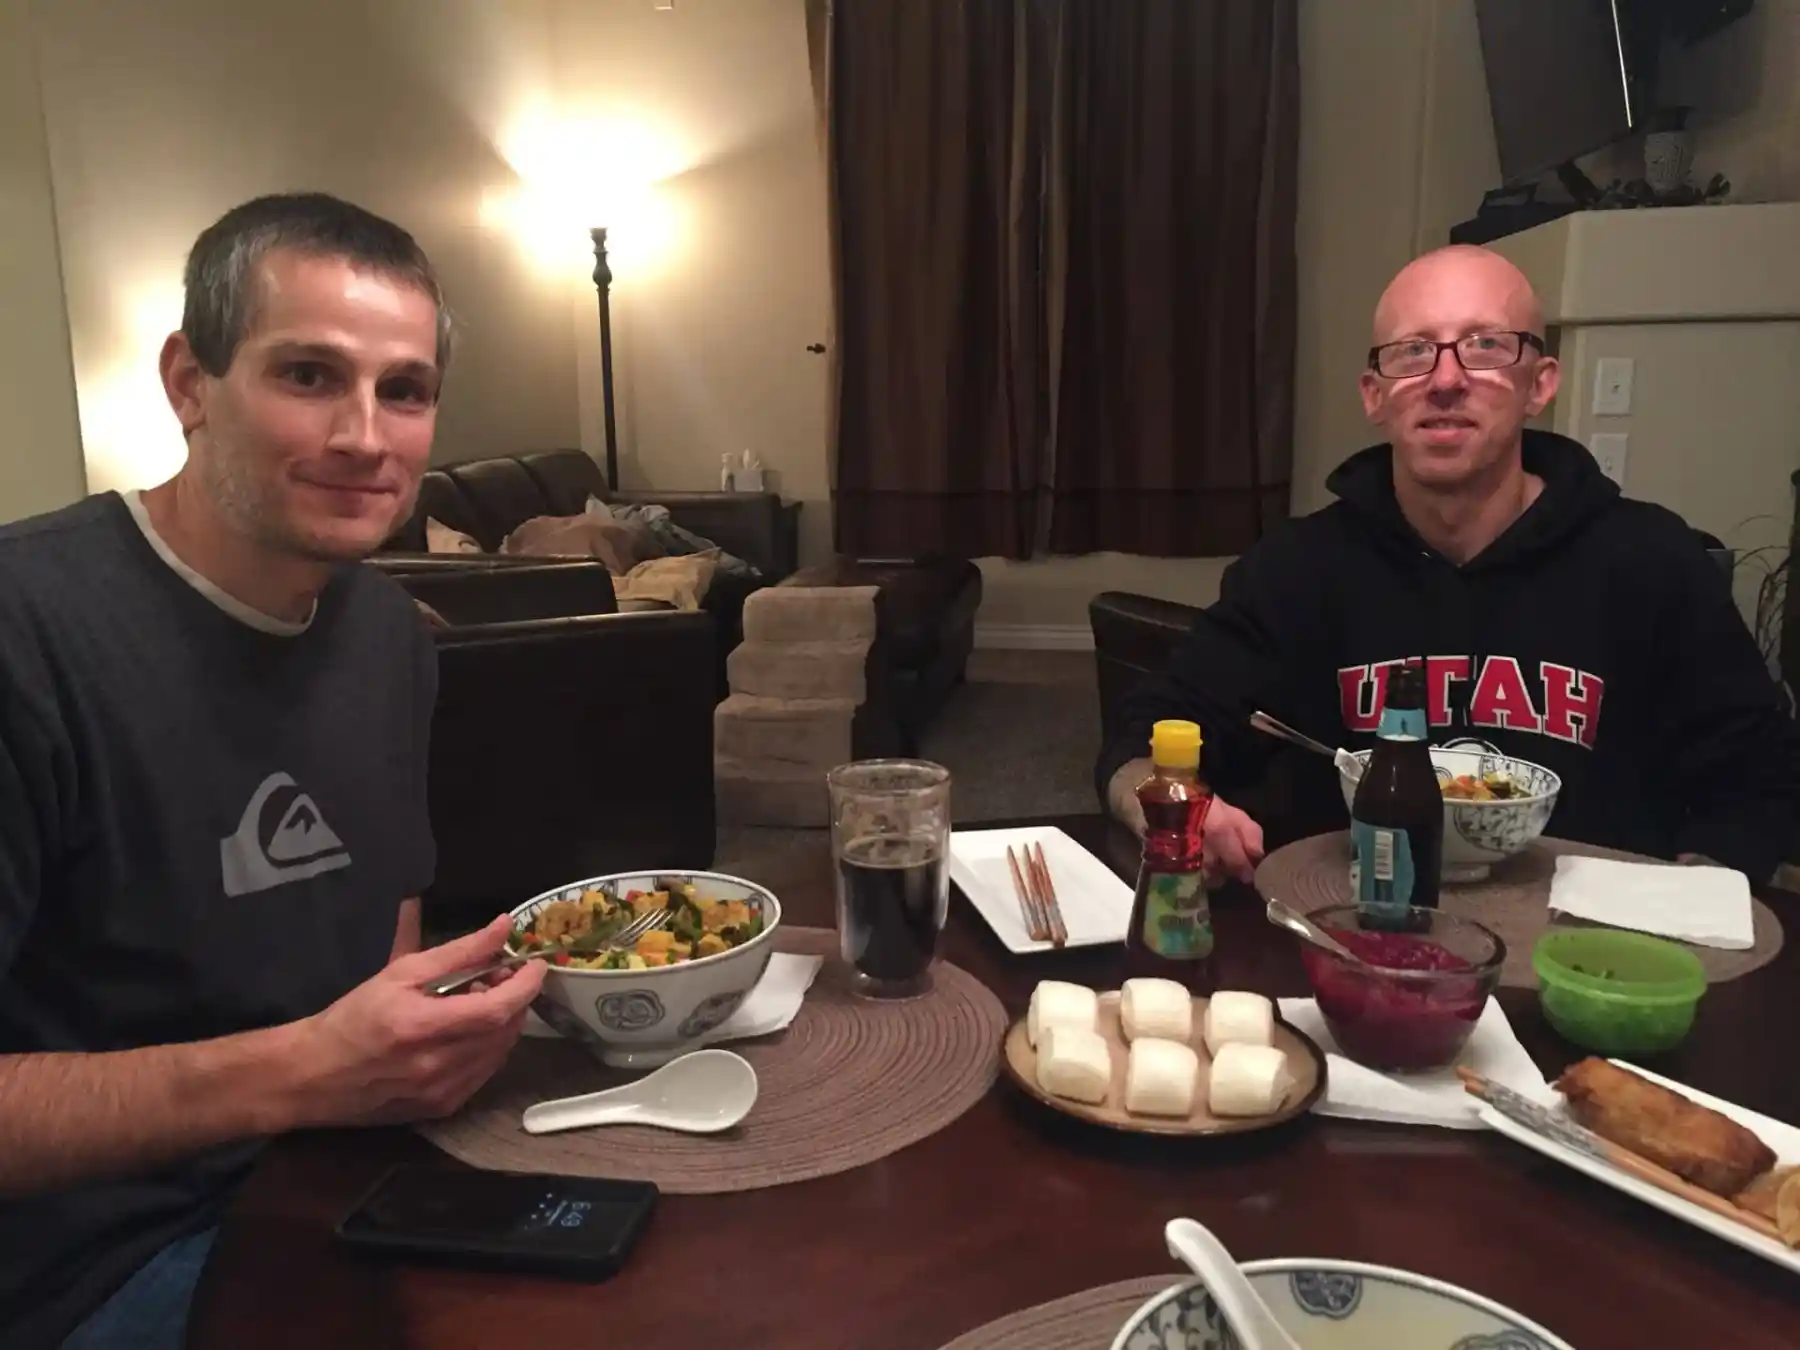 Keith and Randy enjoying the Thanksgiving meal together